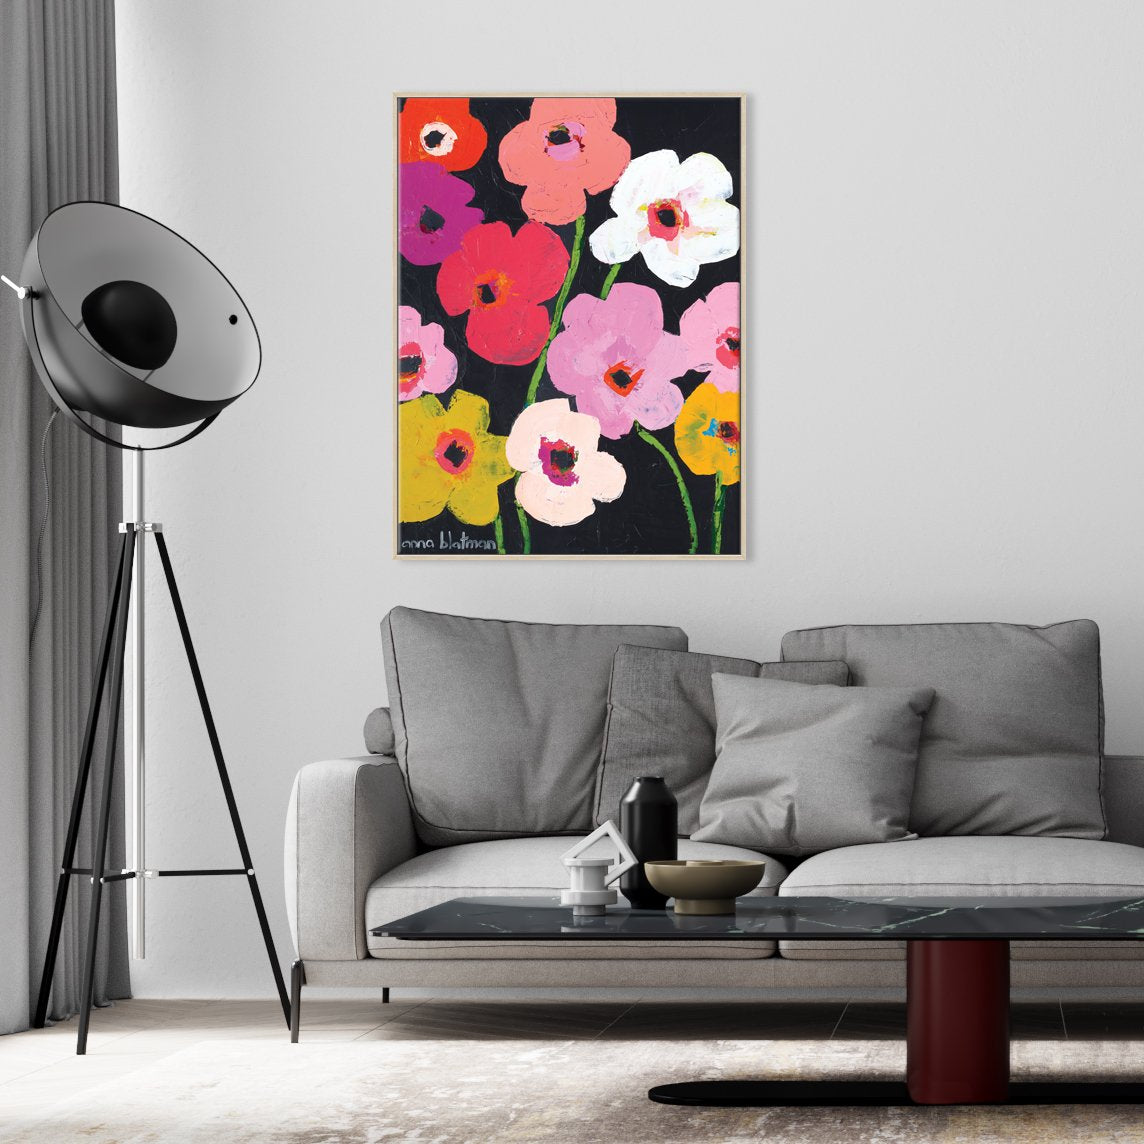 Girl - Gallery Wrapped Canvas